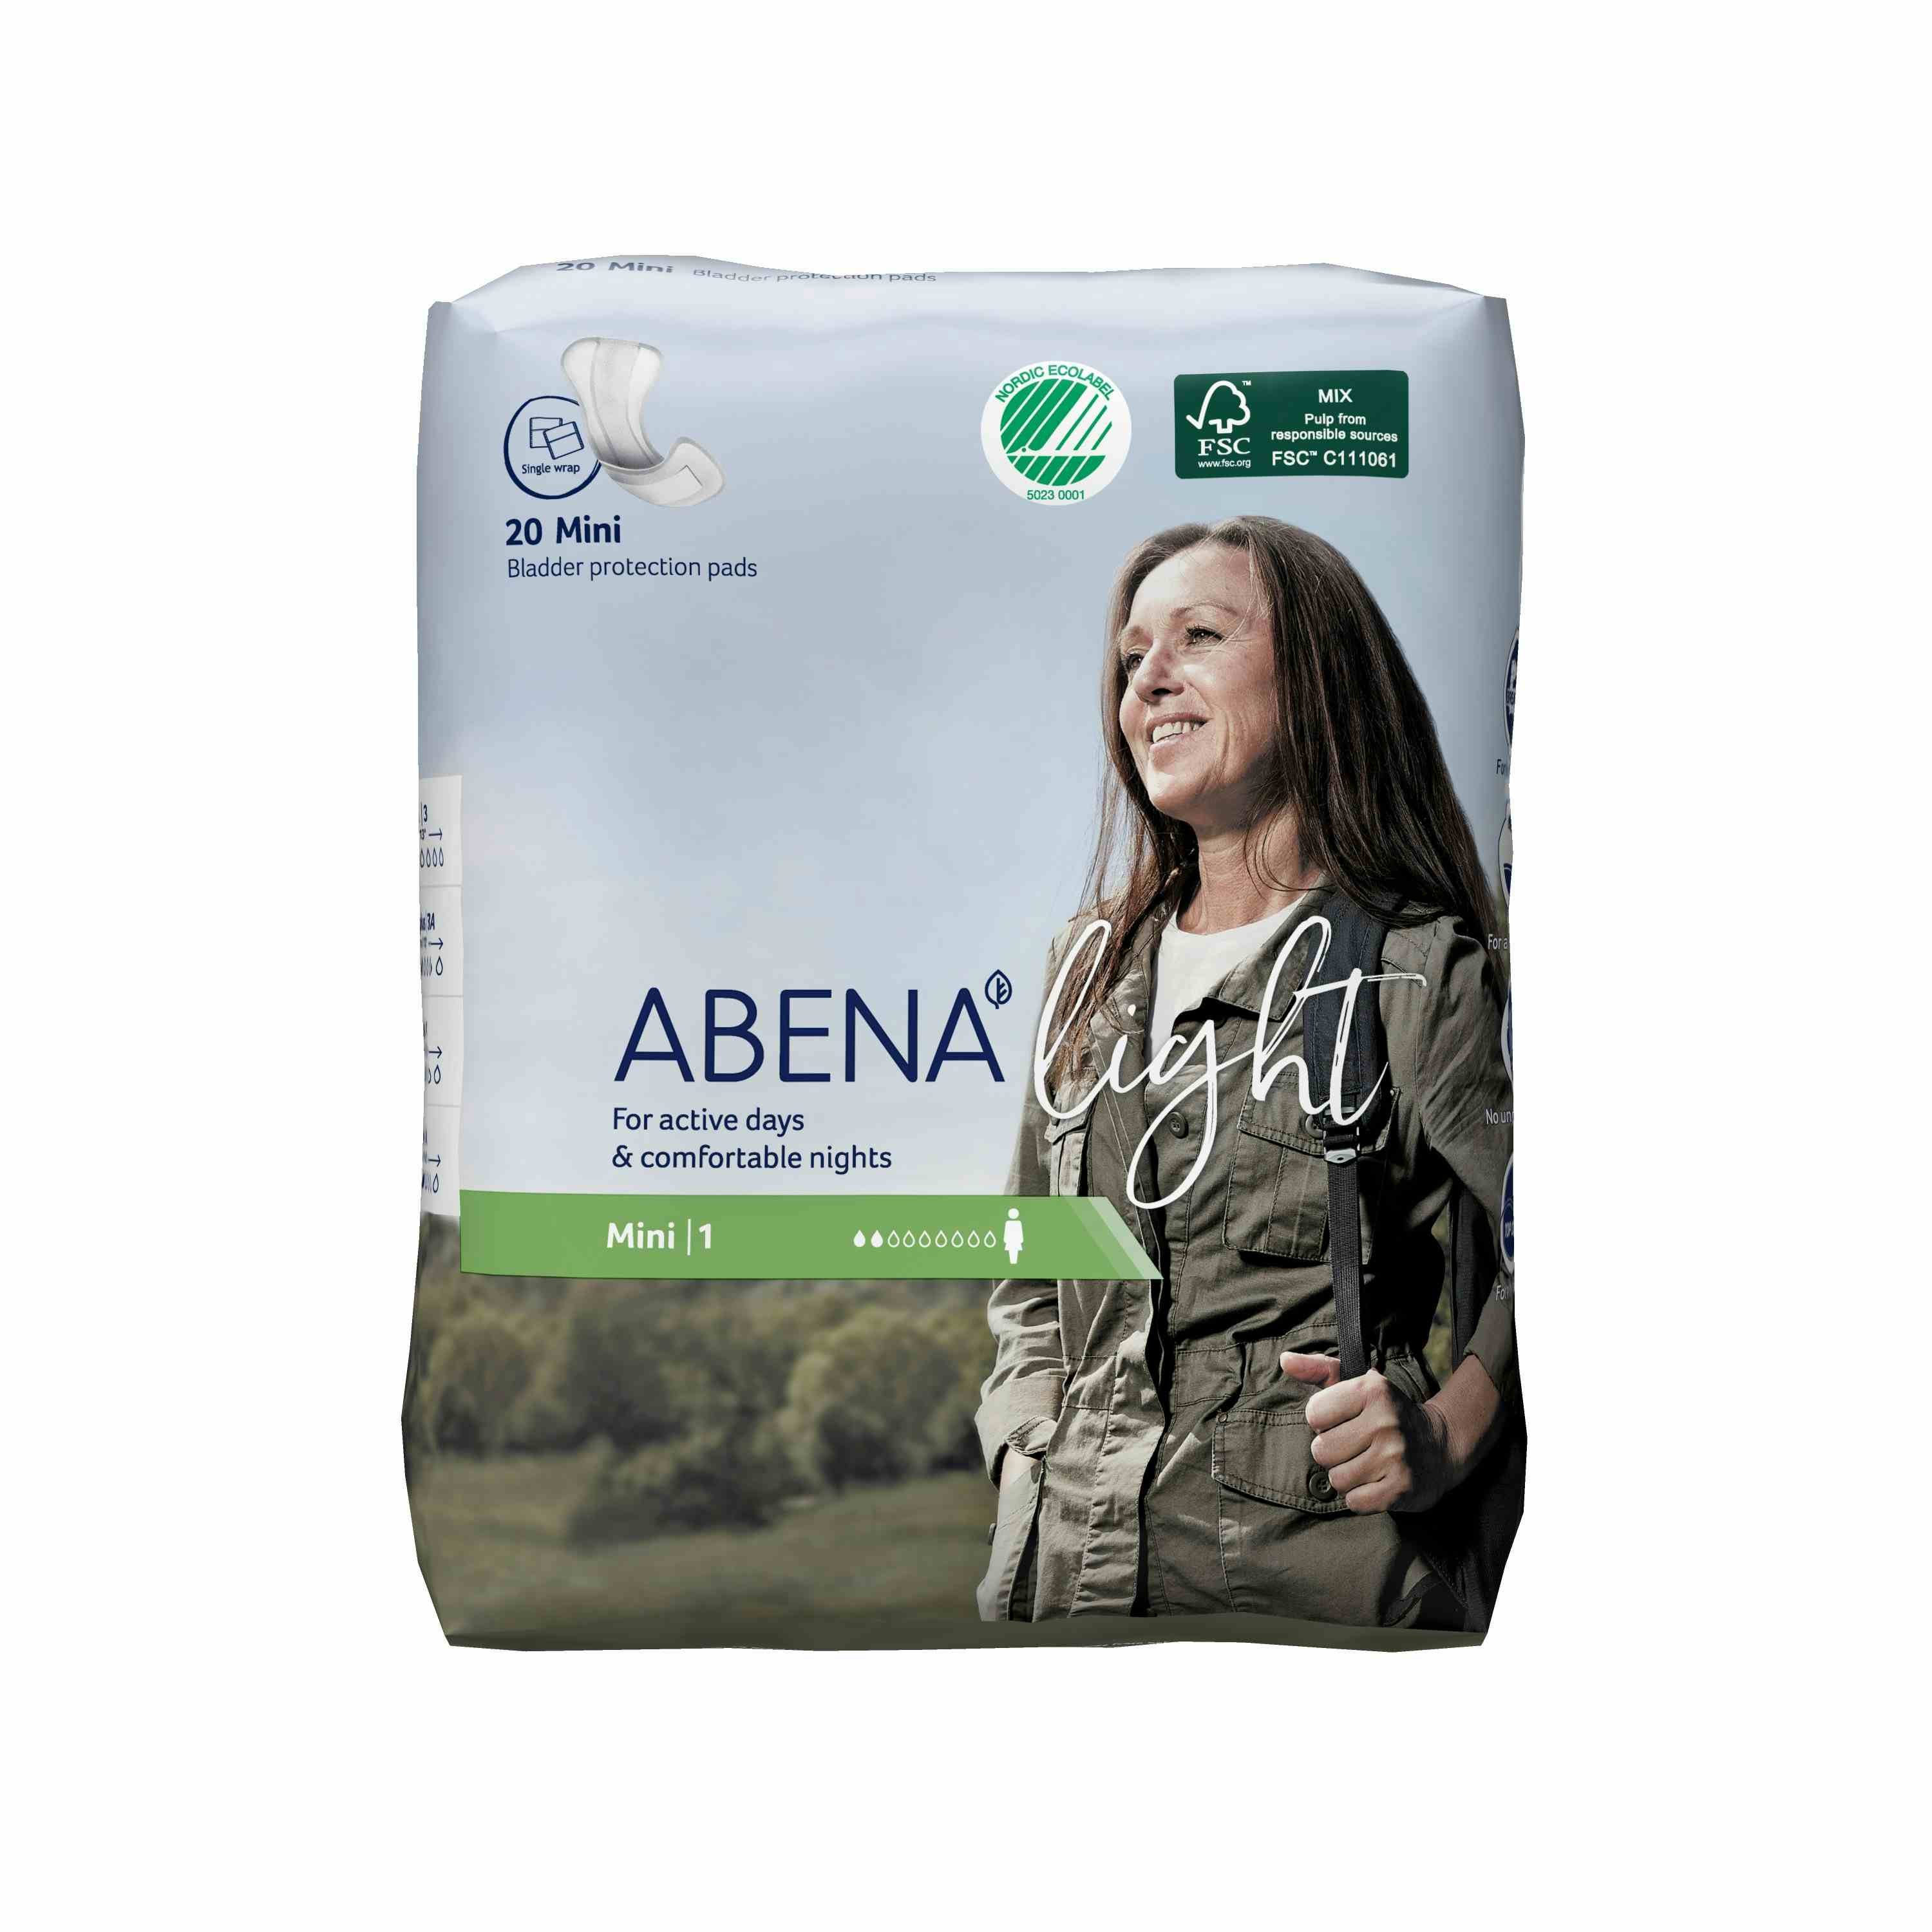 Abena Light Mini Disposable Unisex Adult Bladder Control Pad, Light Absorbency, 1000017155, One Size Fits Most -  Case of 320 Pads (16 Bags)